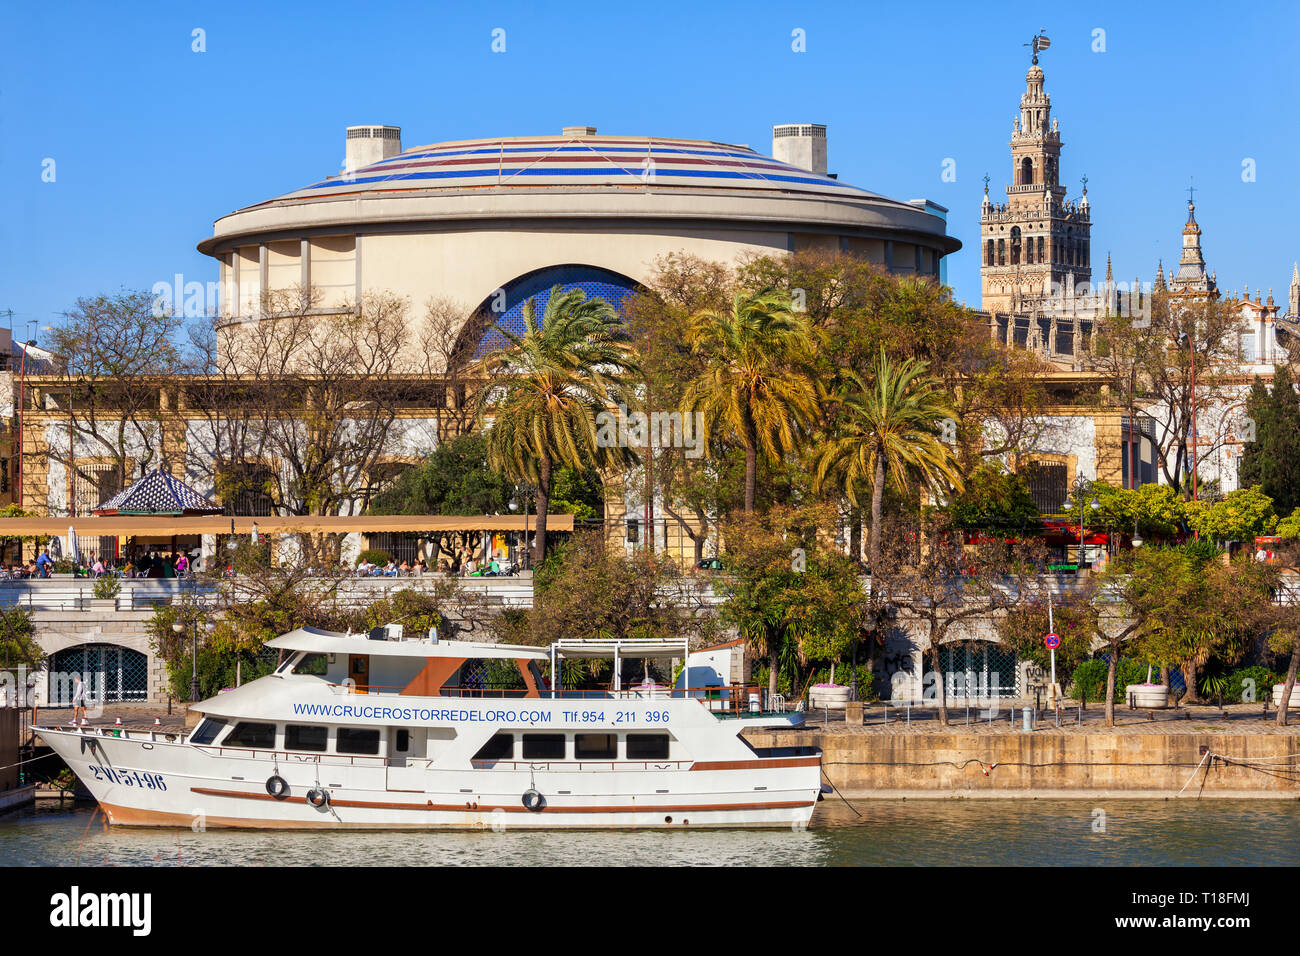 Spain, city of Seville, Teatro de la Maestranza theater and opera house, tour boat on Guadalquivir river, La Giralda bell tower of the Cathedral in th Stock Photo